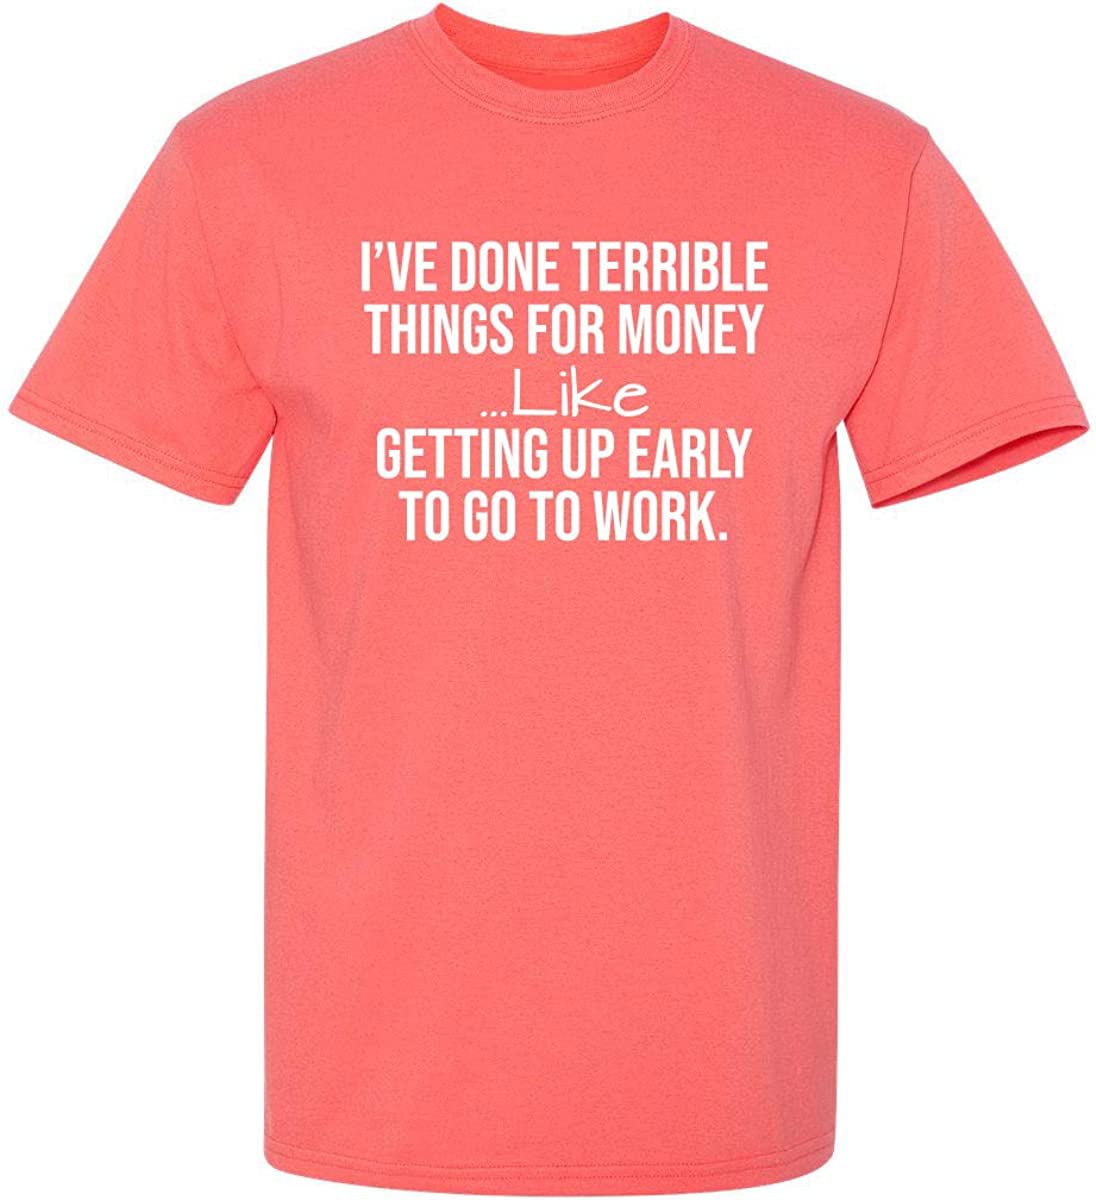 ZWEVBFVBF I've Done Terrible Things for Money Graphic Novelty Sarcasm Funny  T Shirt 